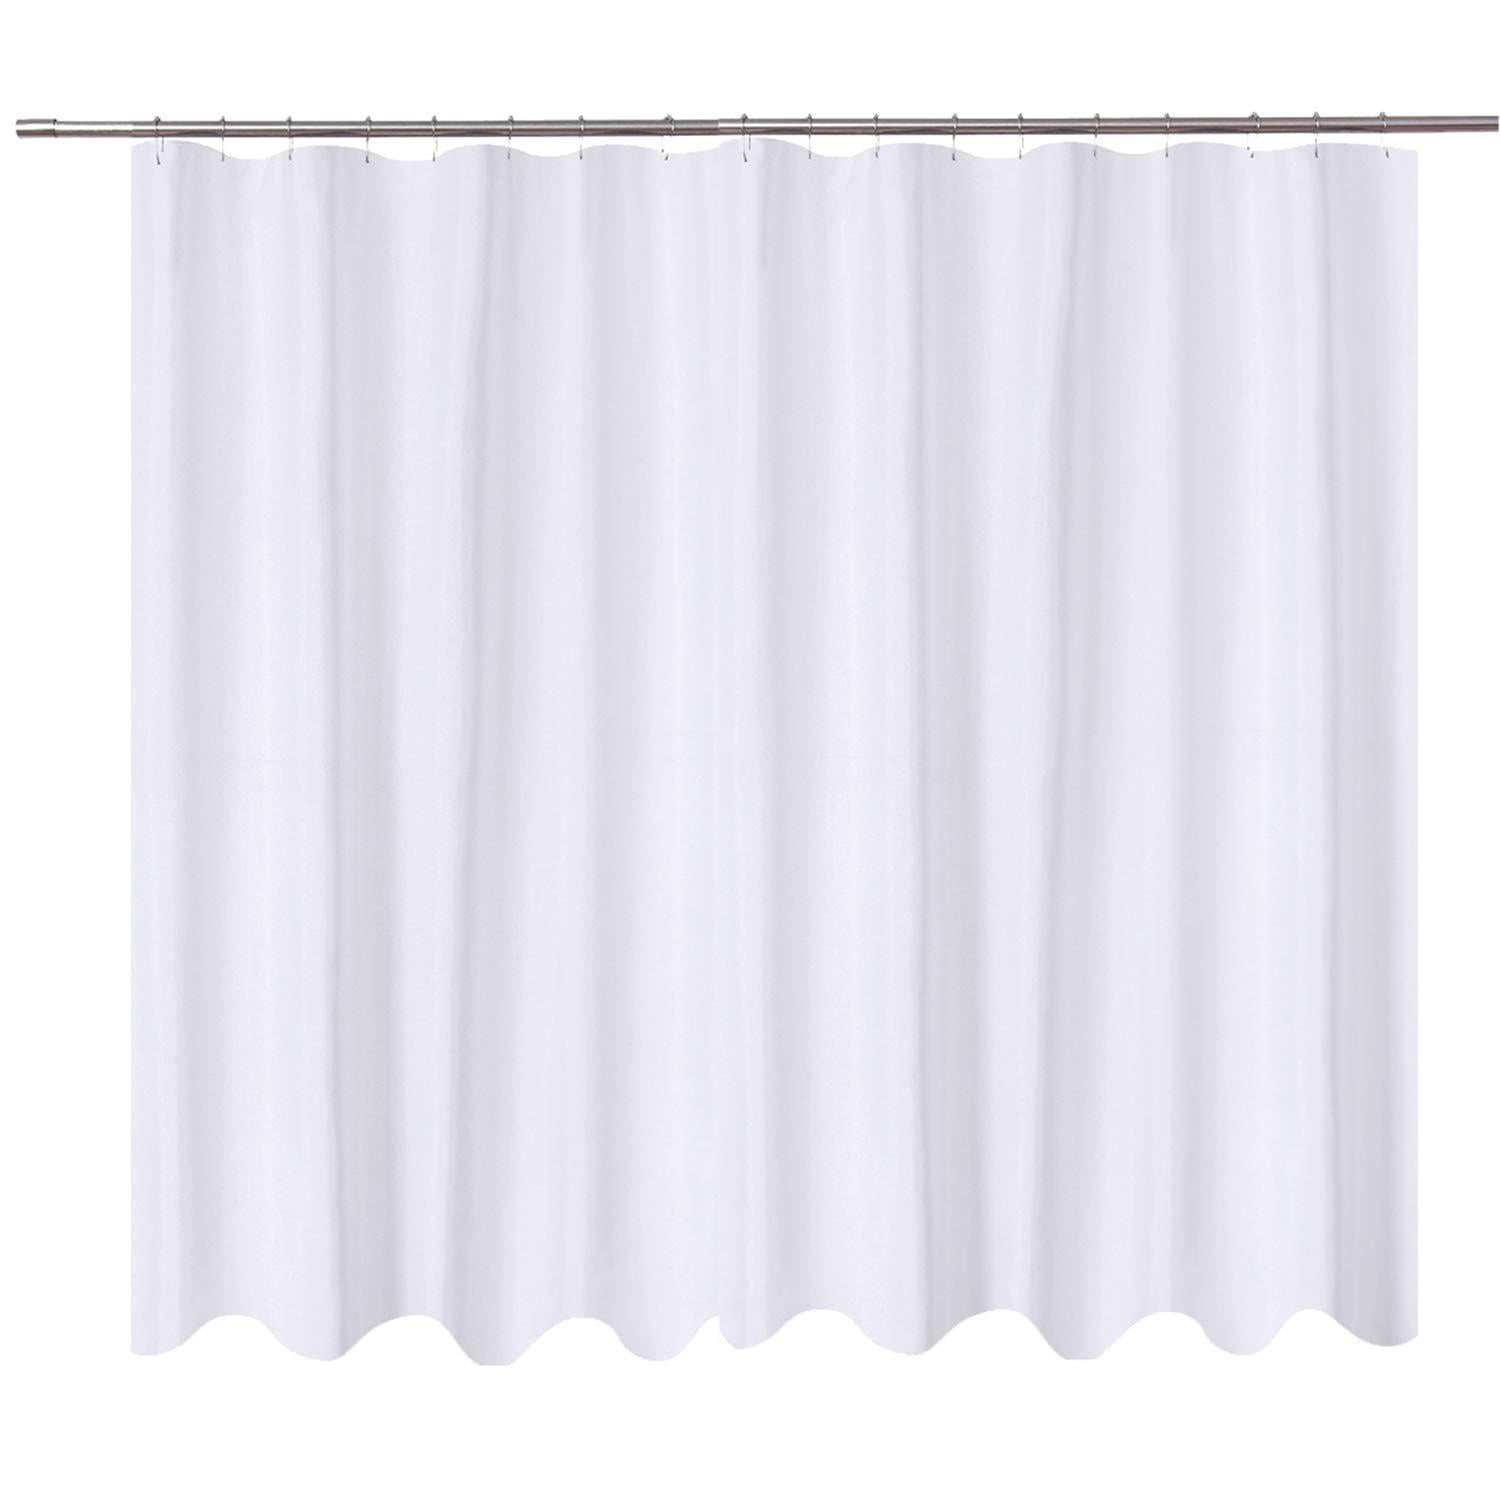 Weighted Hem Beautiful Fabric Shower Curtain Extra Long and Wide in Two Sizes 